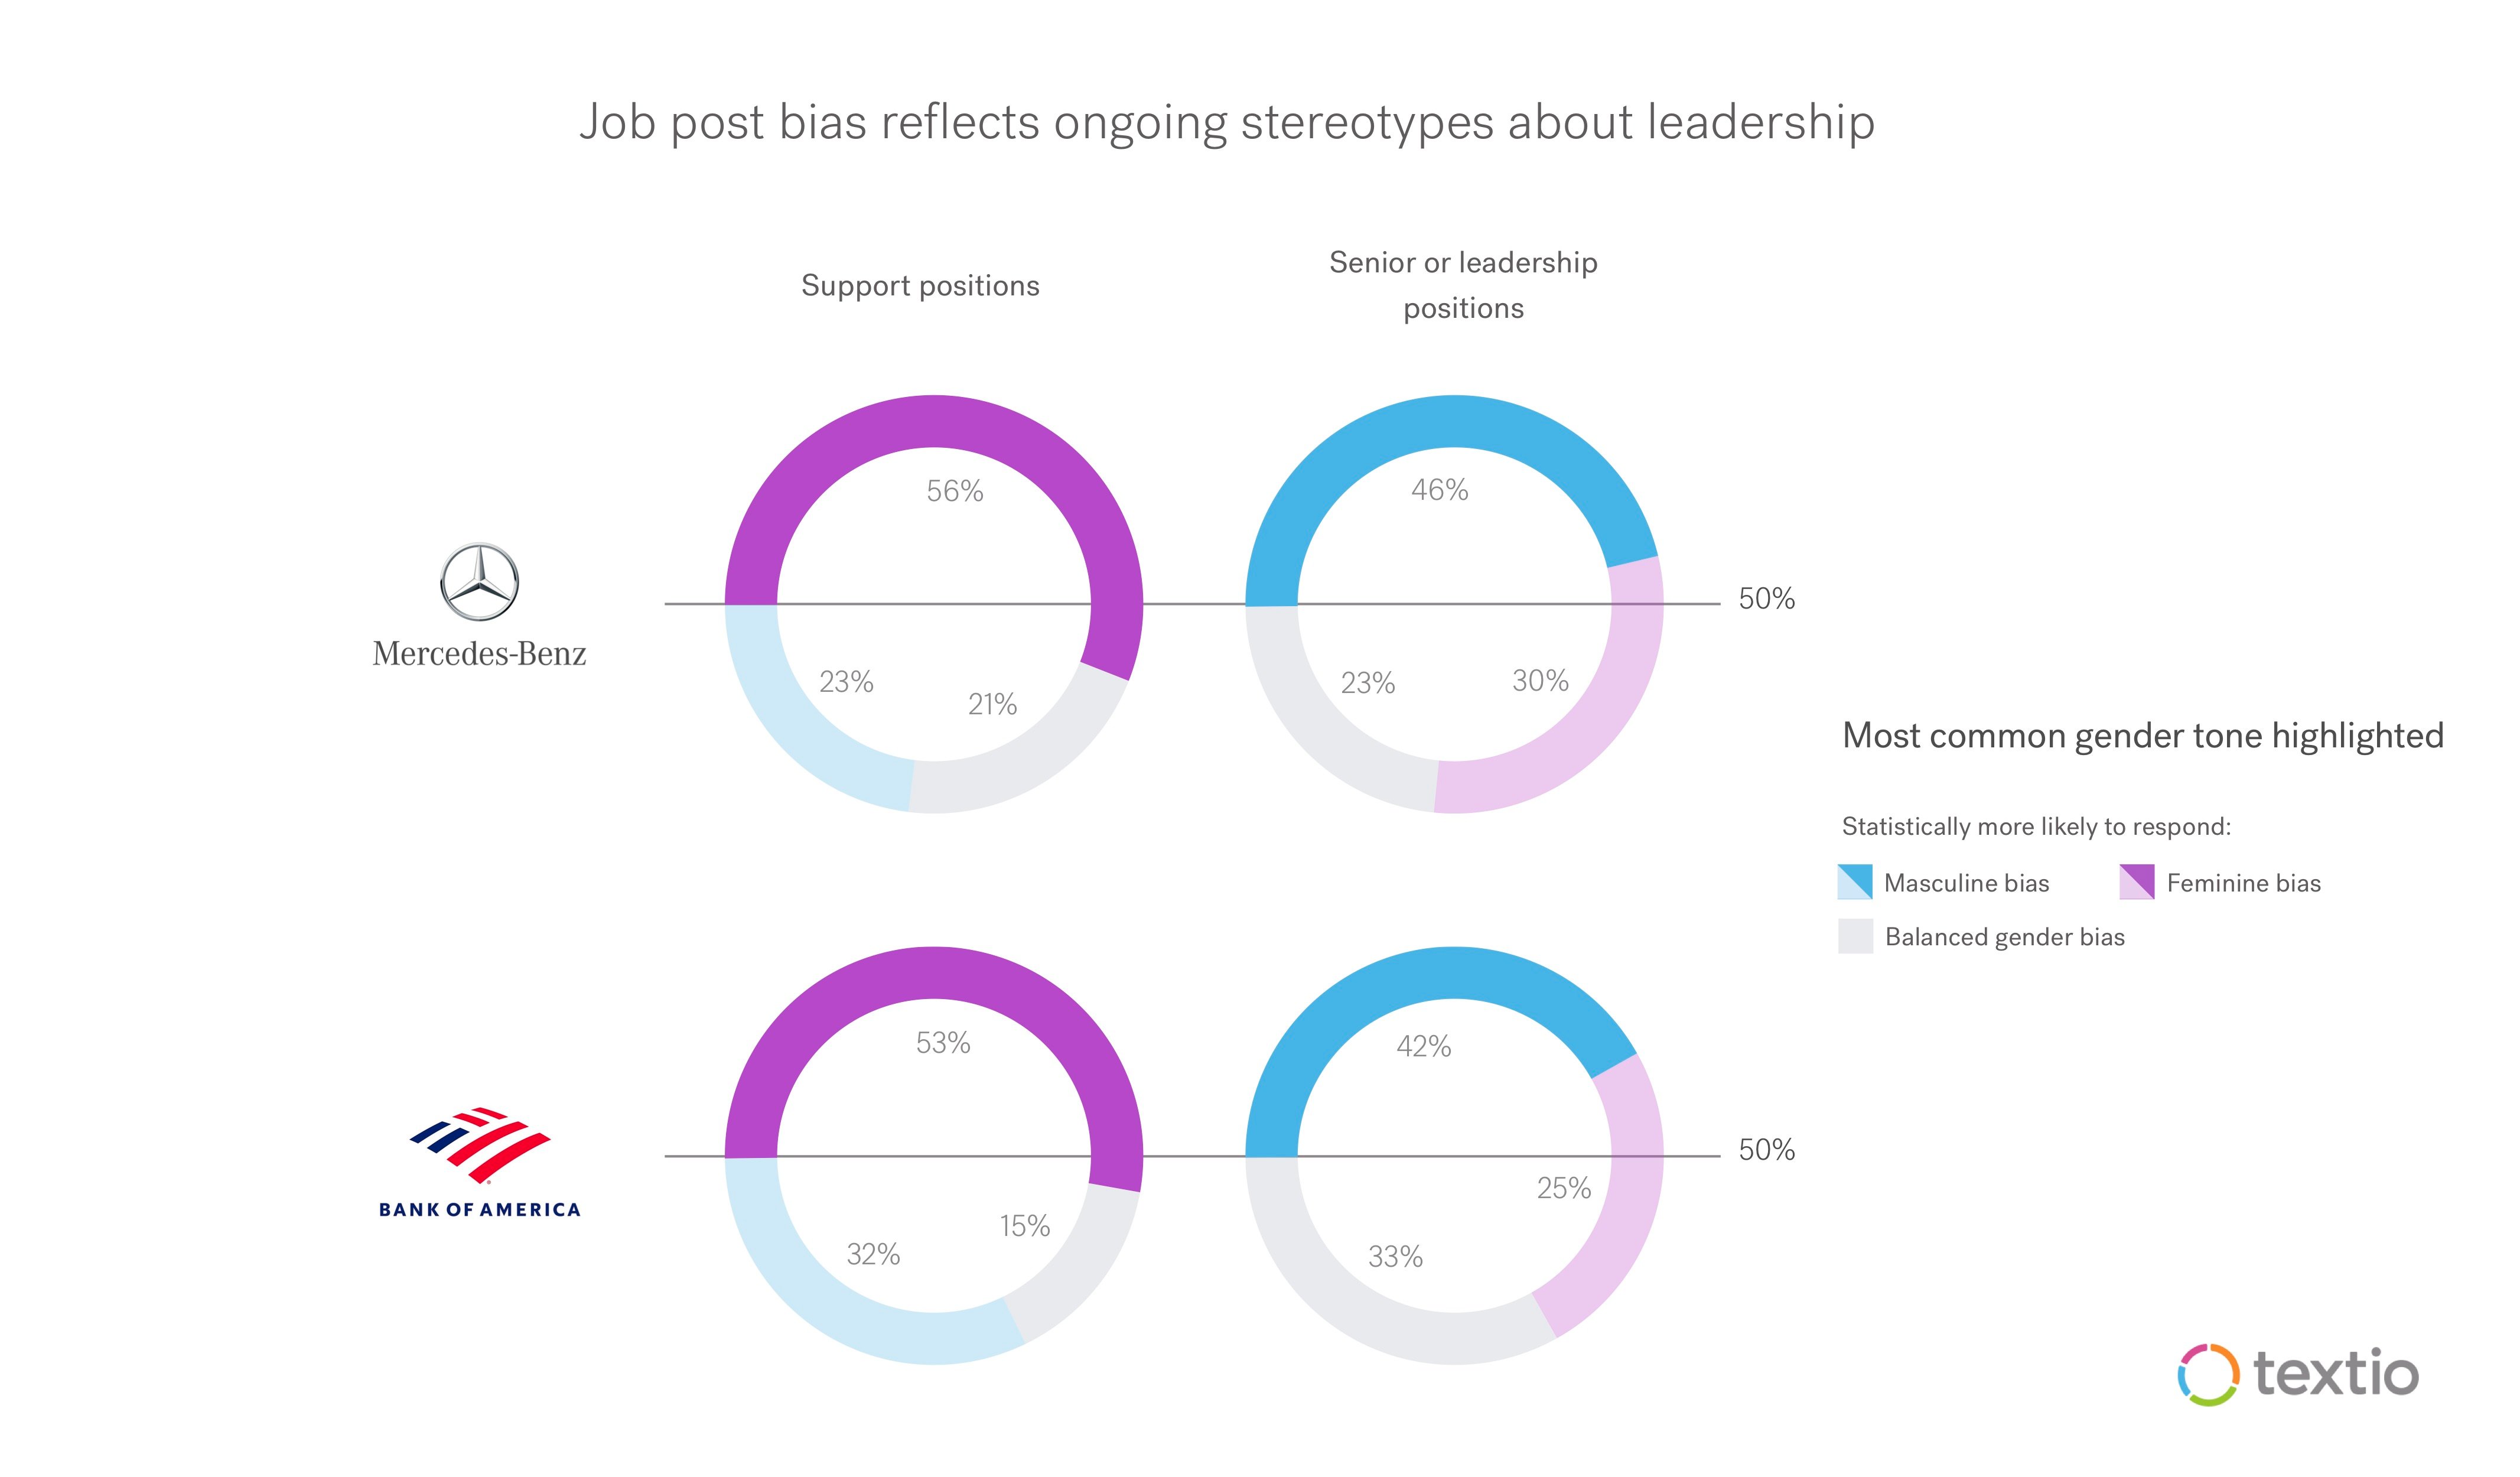 Job post bias pie charts comparing mercedes benz and bank of america in support vs senior leadership positions. Job post bias reflects ongoing stereotypes about leadership most postings statistically are written to attract more men for leadership, and most postings are statistically written to attract more women to support positions.